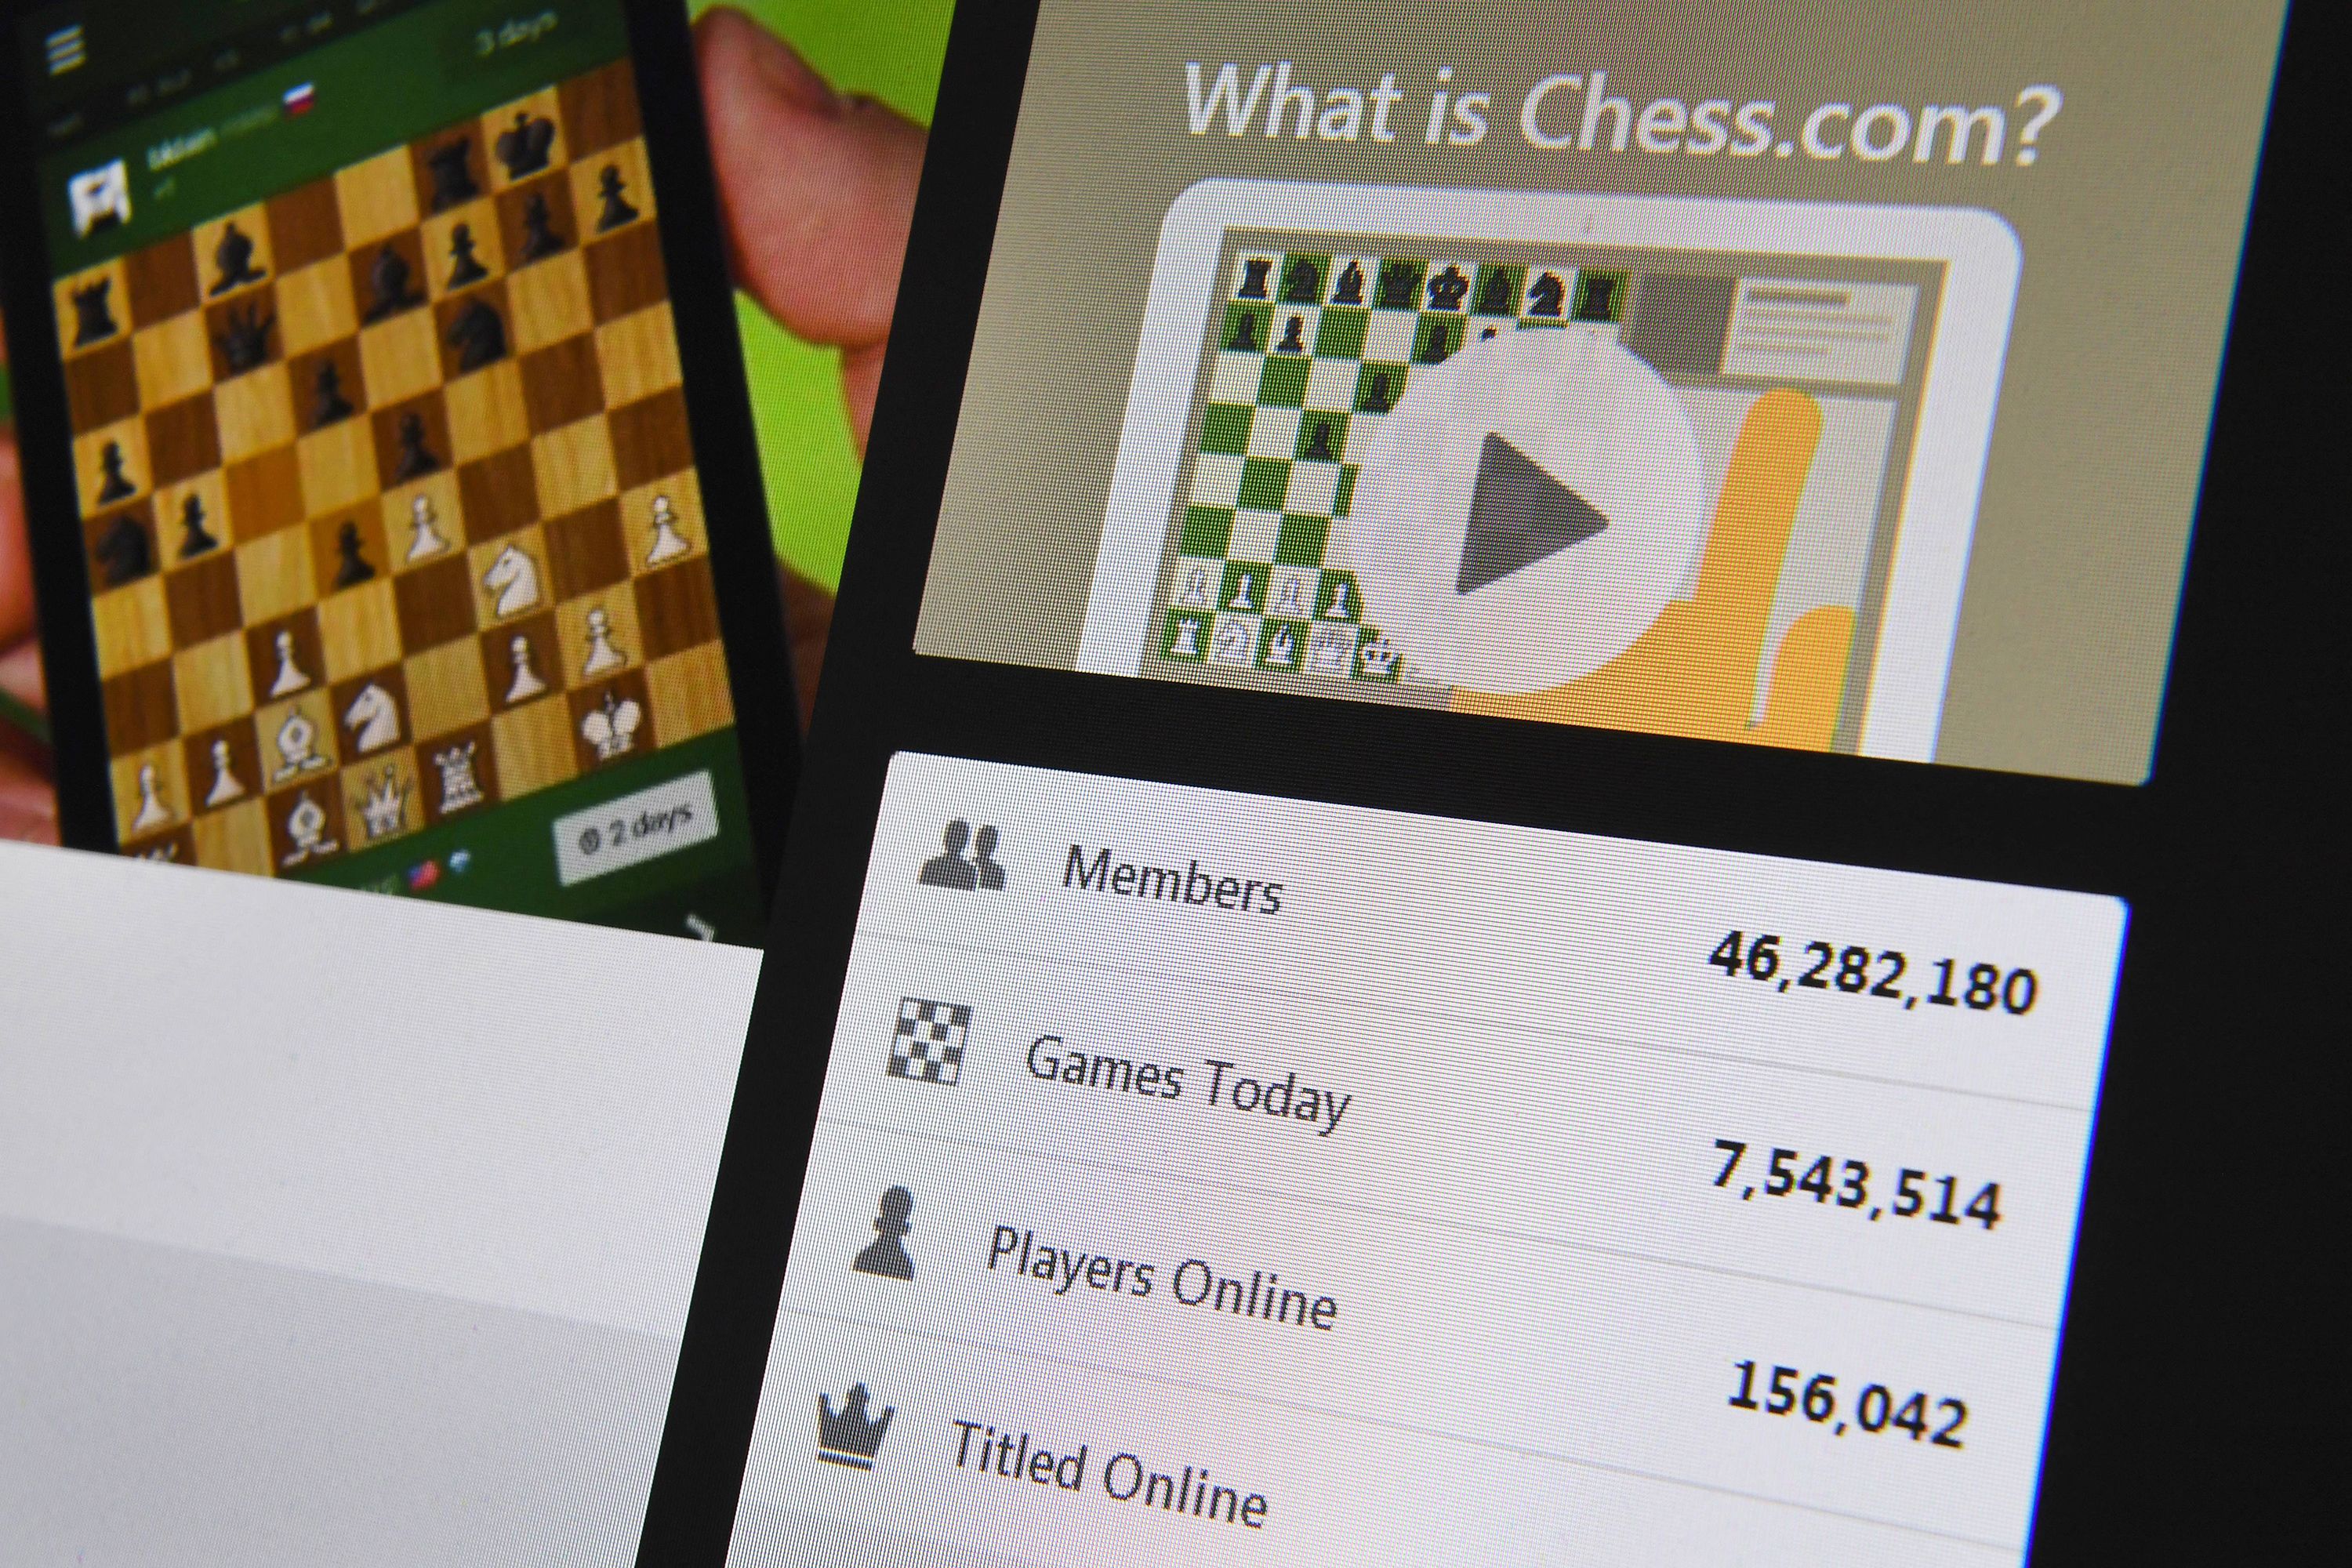 UPDATED] 10 Minute Chess Now Rapid Rated, Bullet Ratings Increased - Chess. com